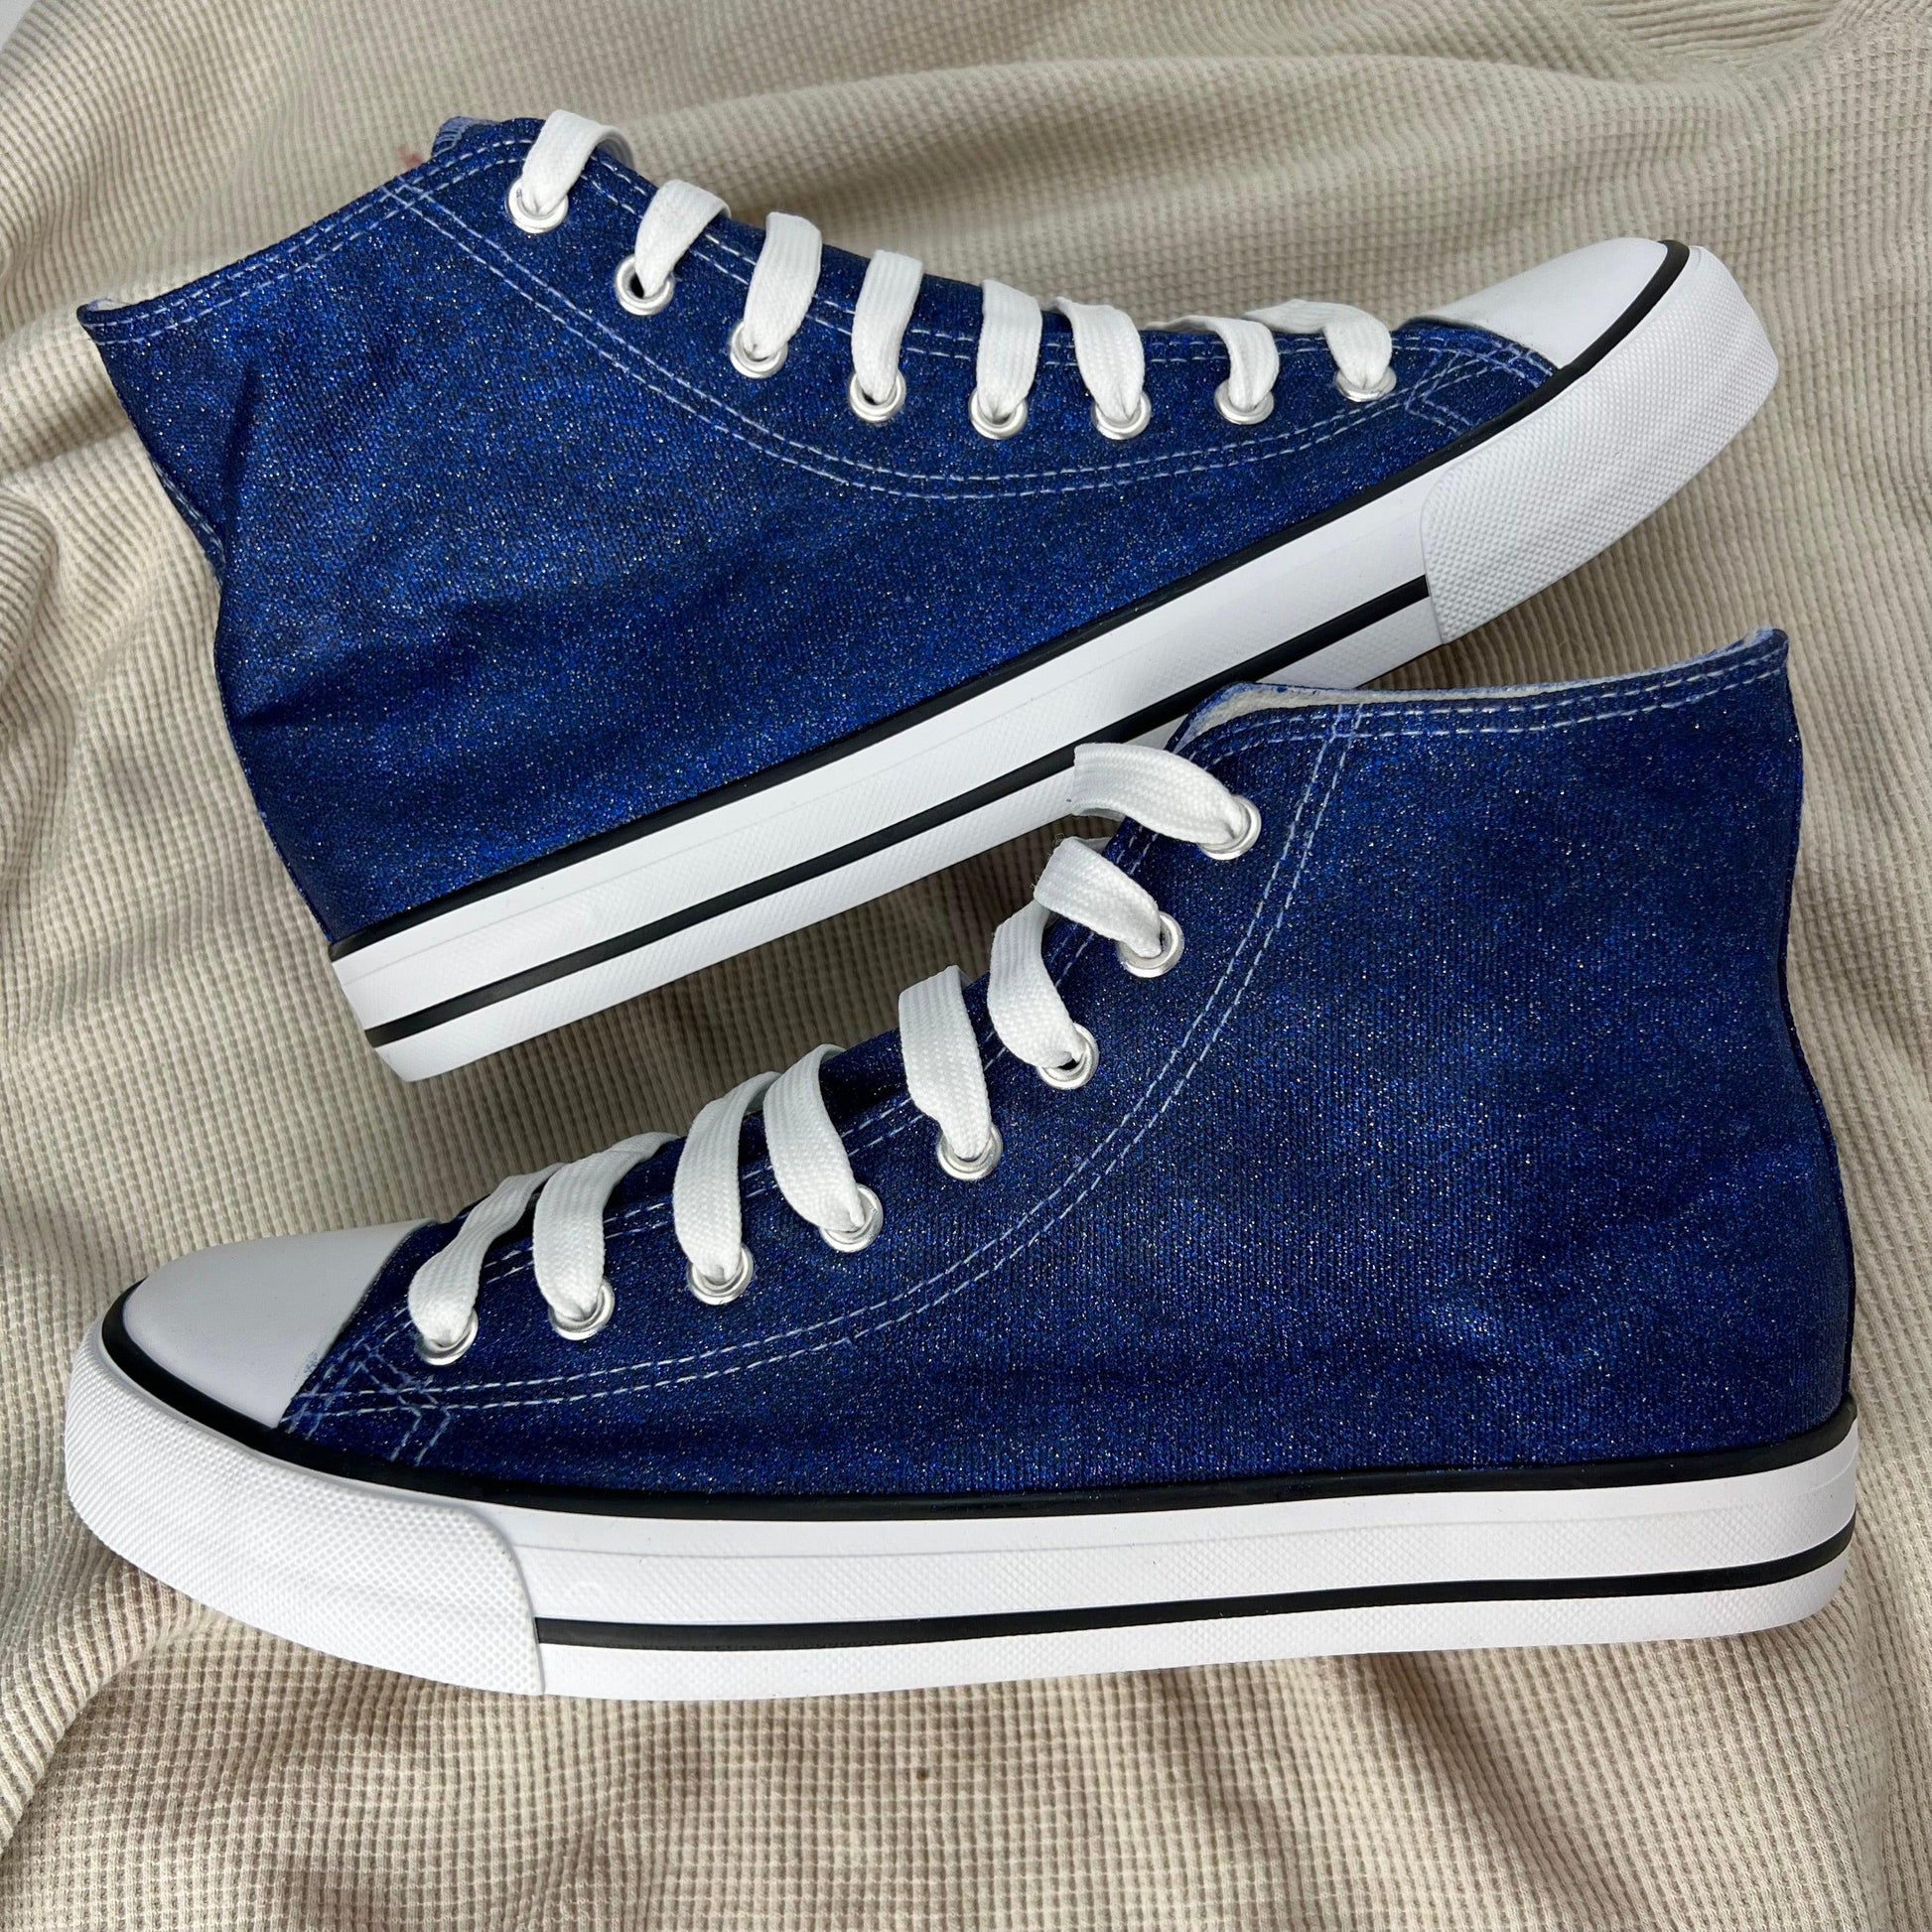 Navy Glitter Hi Top Converse - ButterMakesMeHappy